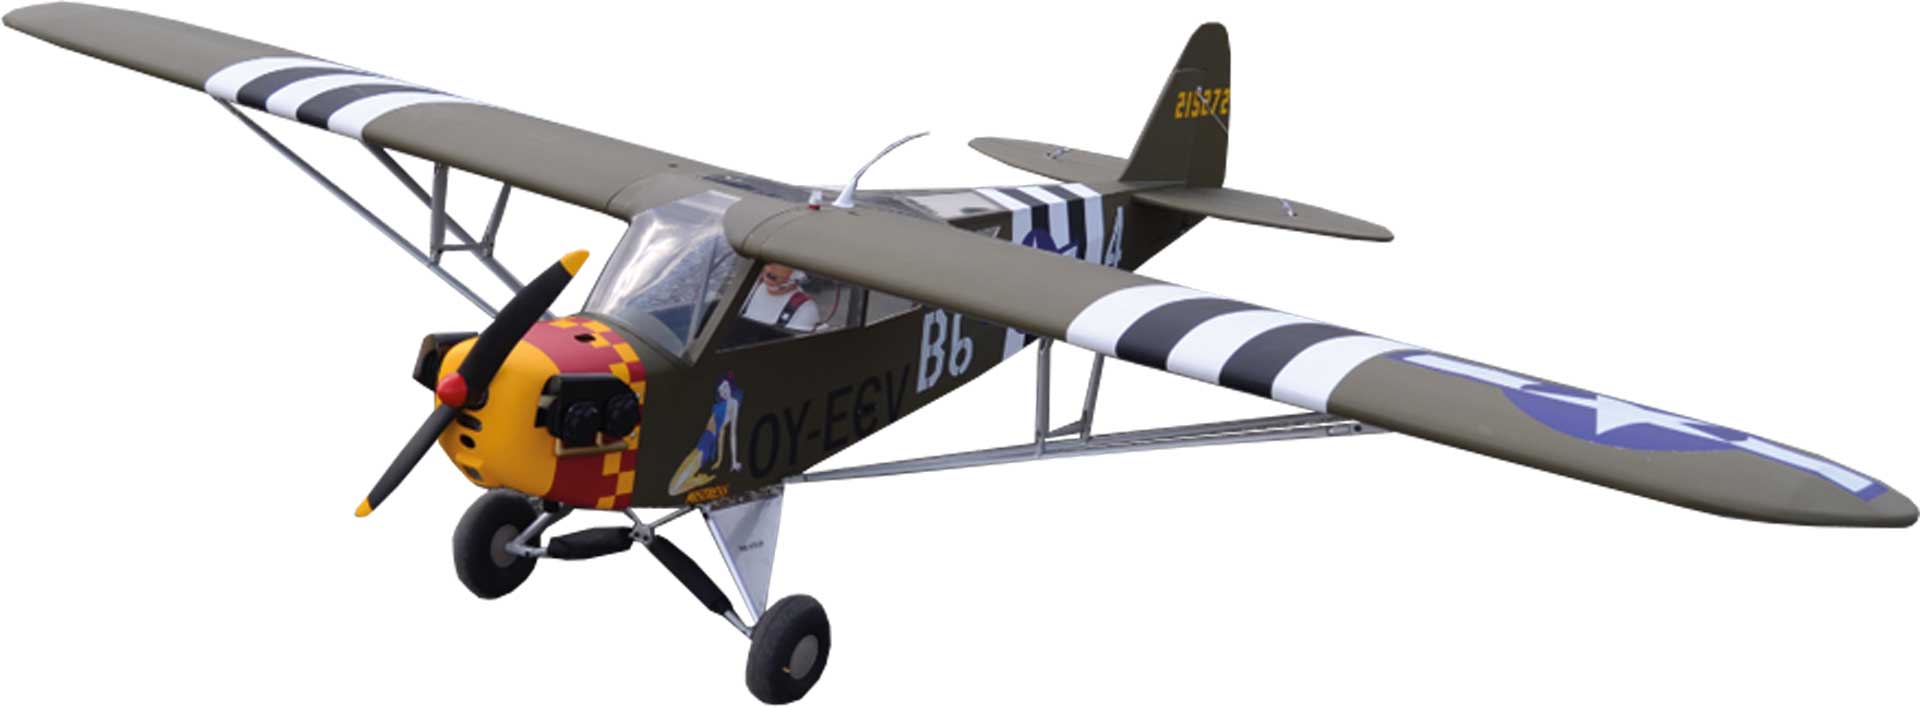 Seagull Models ( SG-Models ) L-4 GRASSHOPPER 90" ARF 2,28M FOR GLOW OR ELECTRIC ENGINE